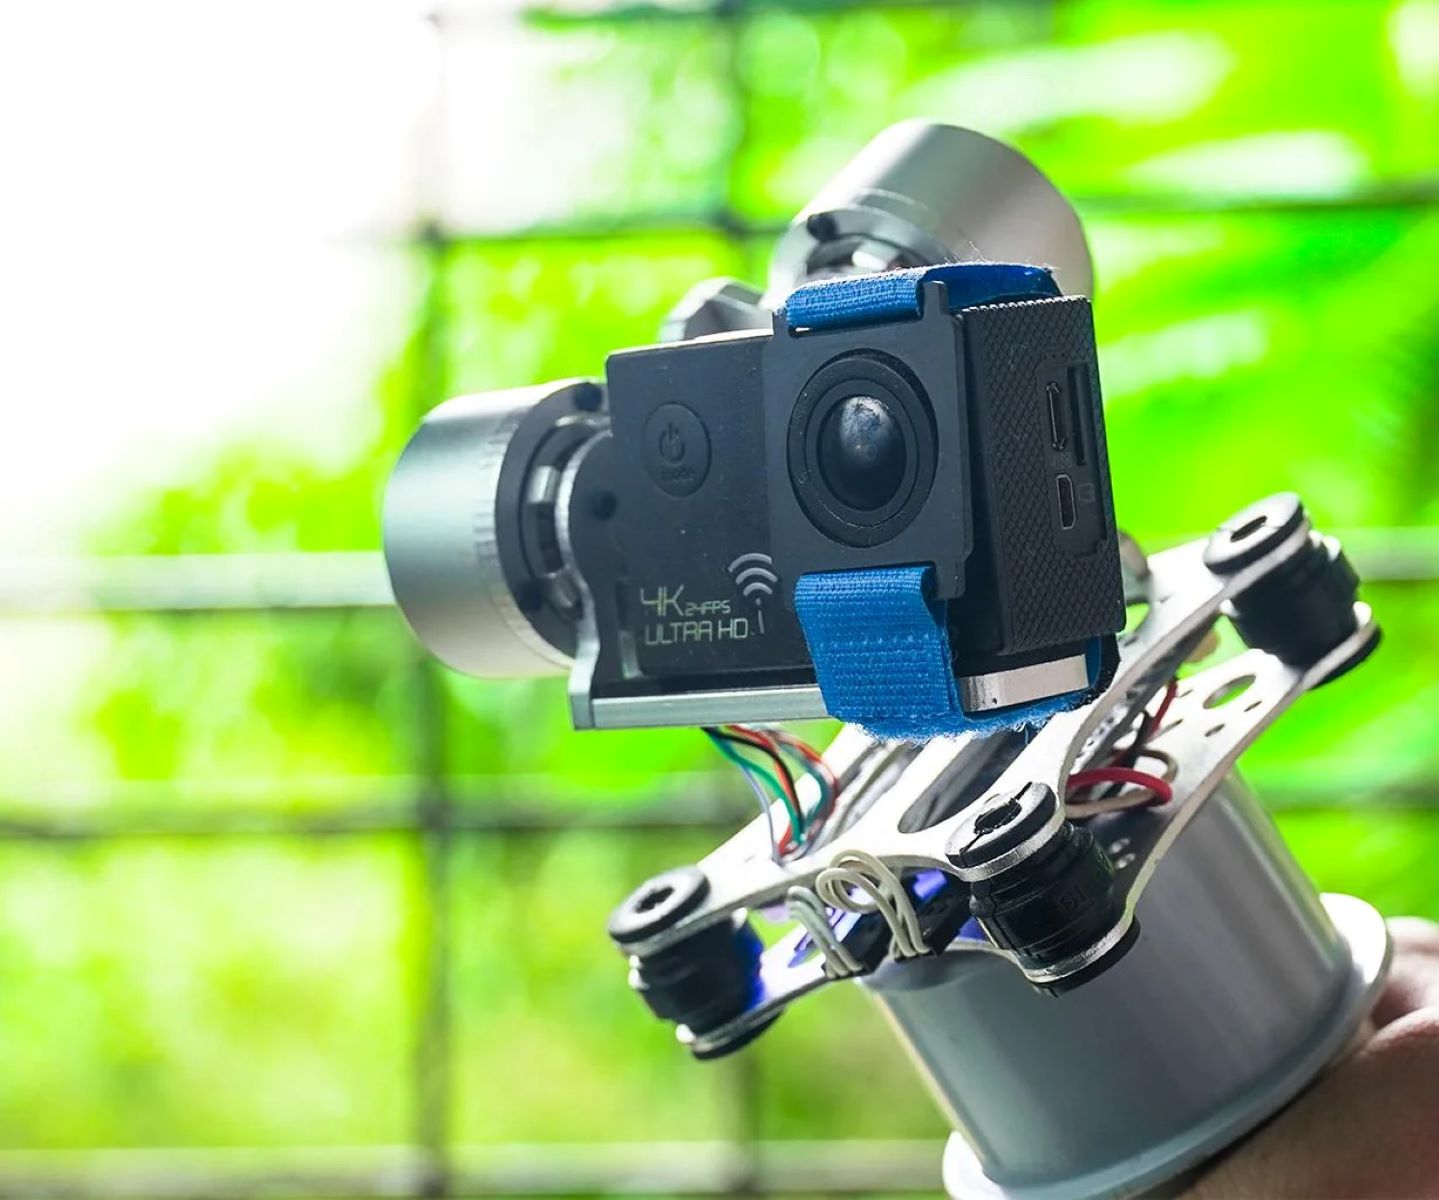 How To Build A Stabilization Gimbal For An Action Camera